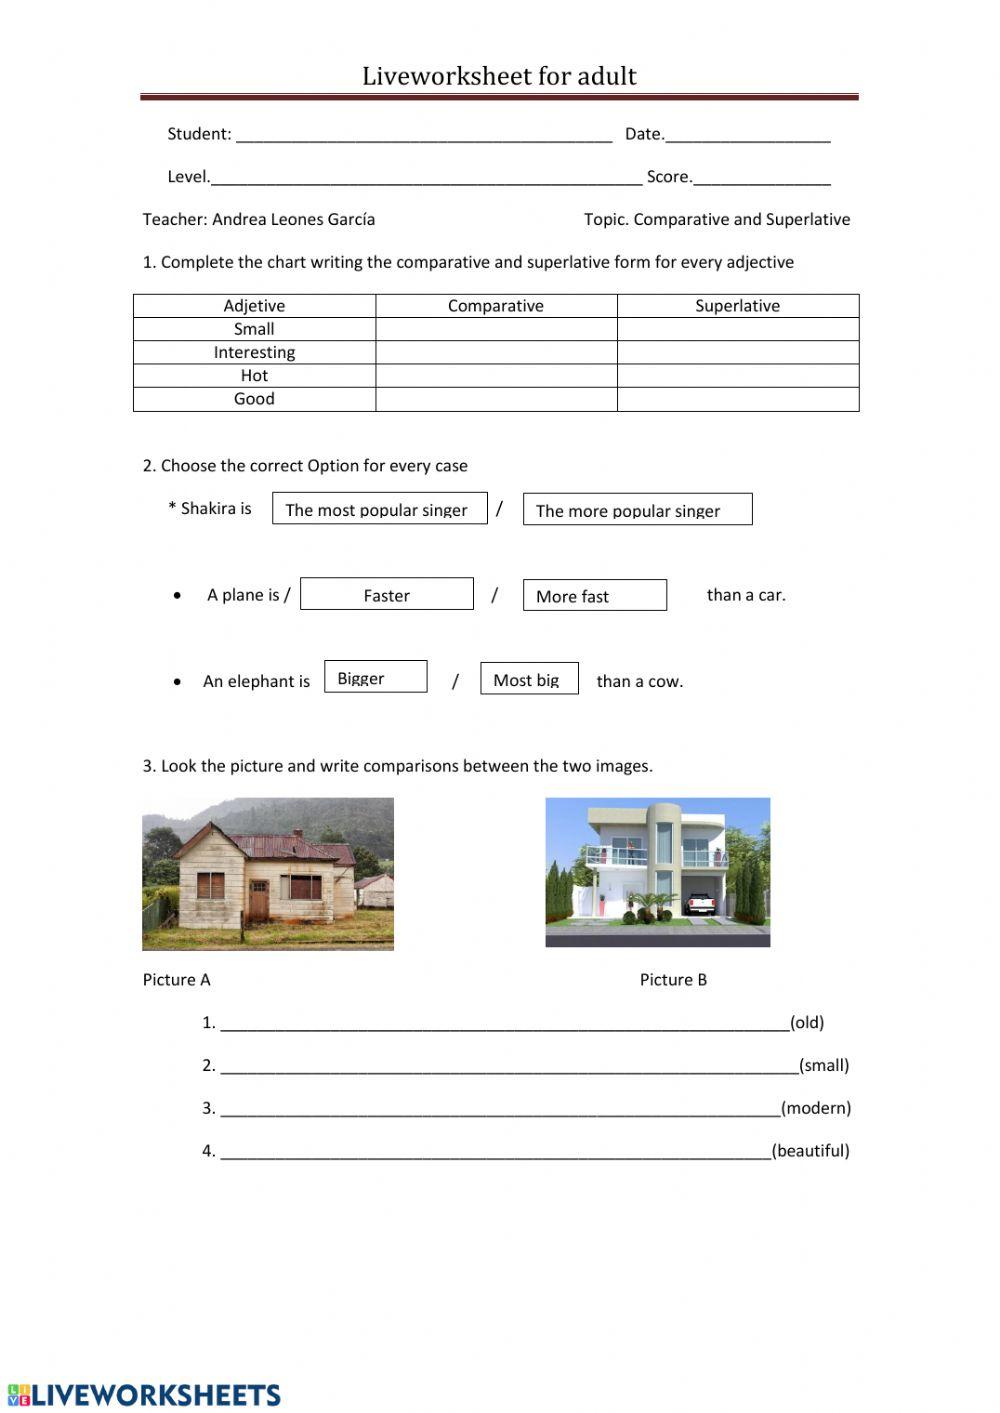 Live worksheets fro adults